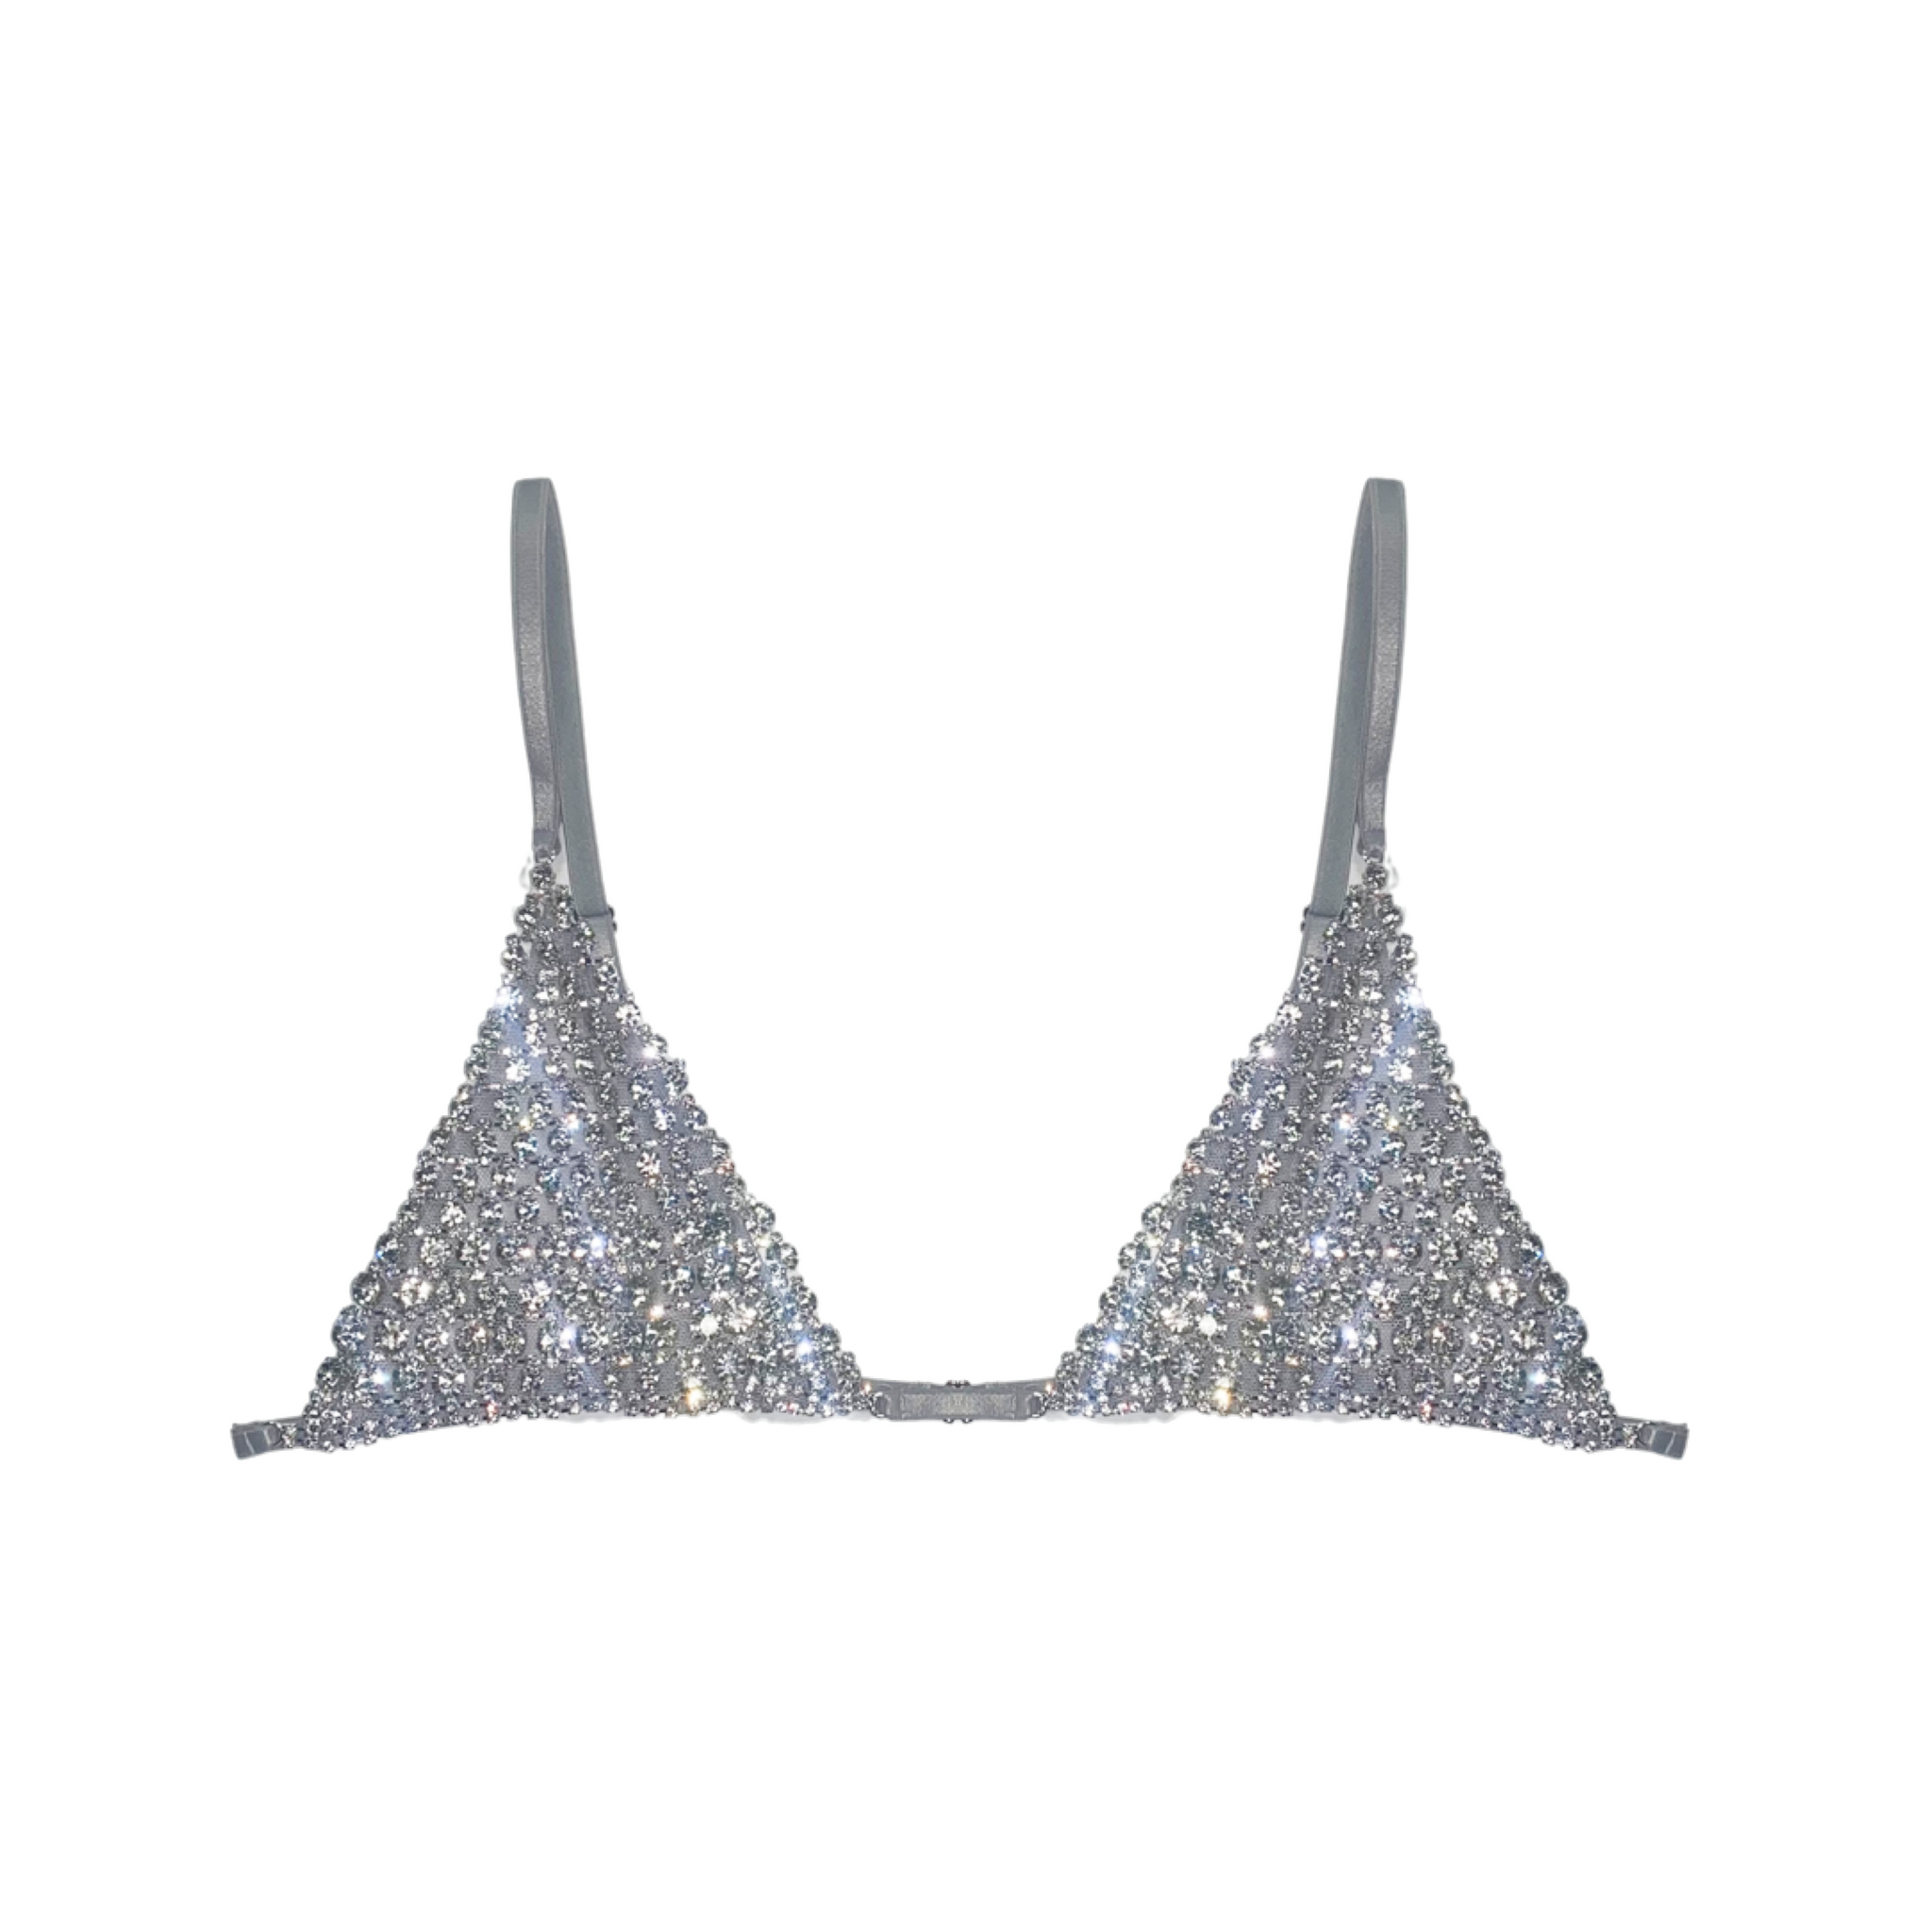 A Cool, Bedazzled Bralette for a Night Out